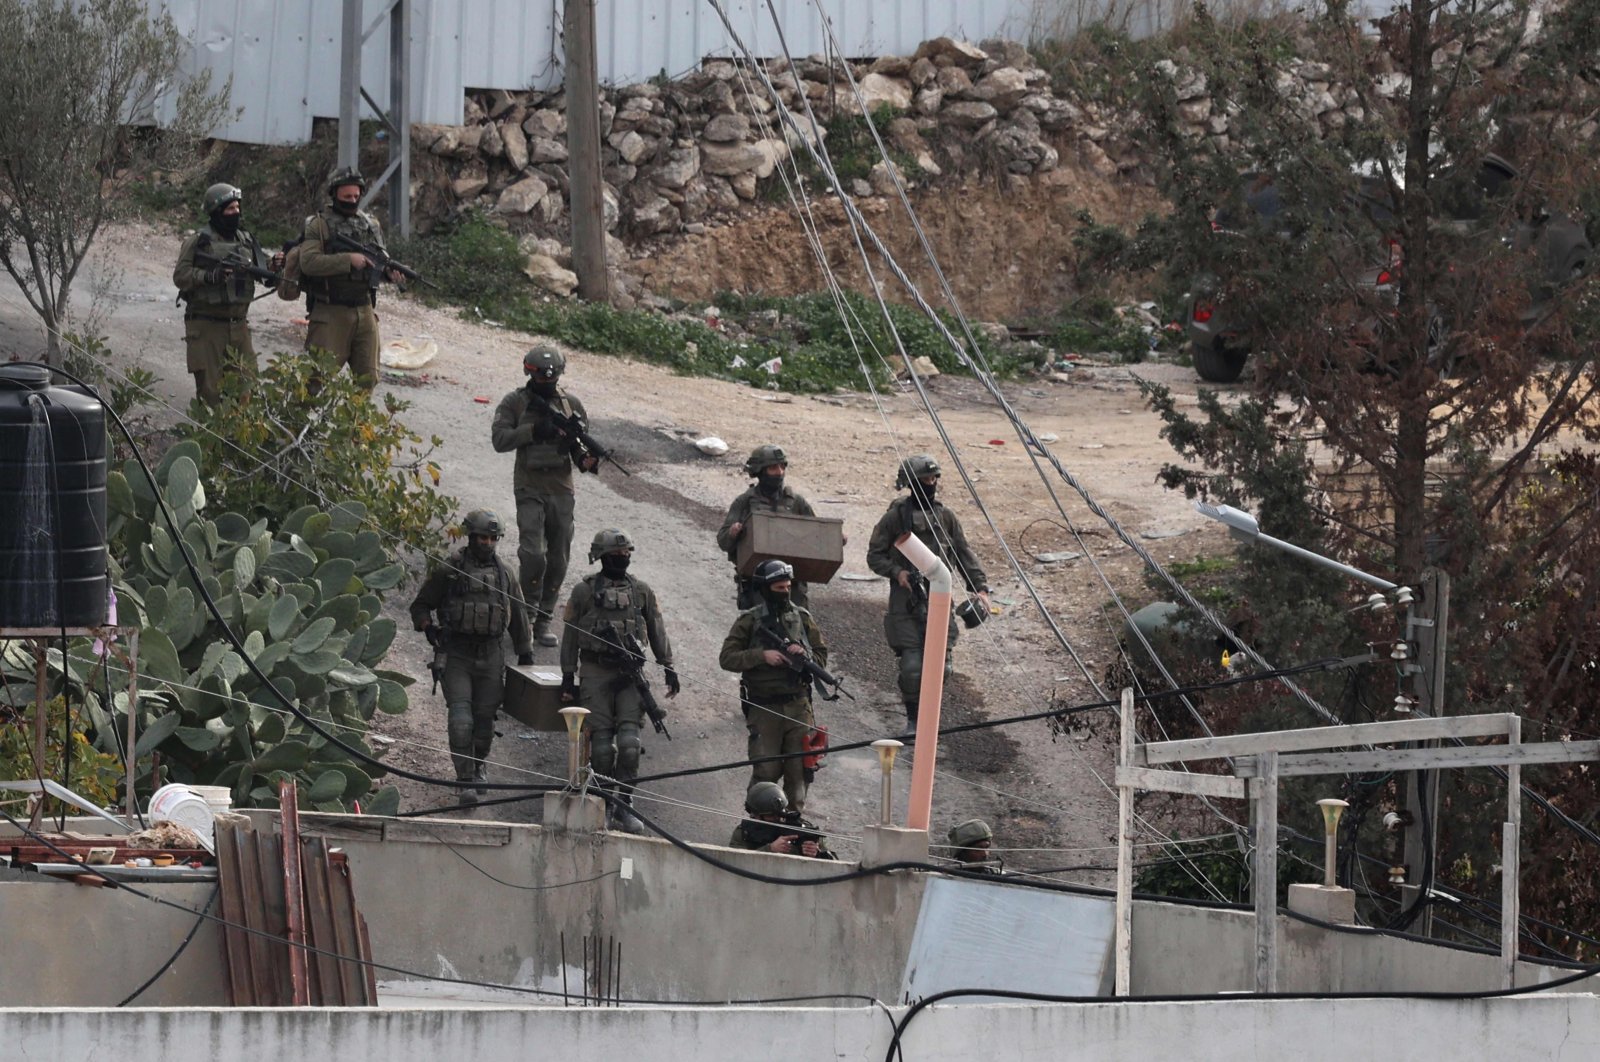 Israeli soldiers are pictured in the Palestinian village of Kafr Dan in Jenin, in the occupied West Bank, Jan. 2, 2023. (AFP Photo)